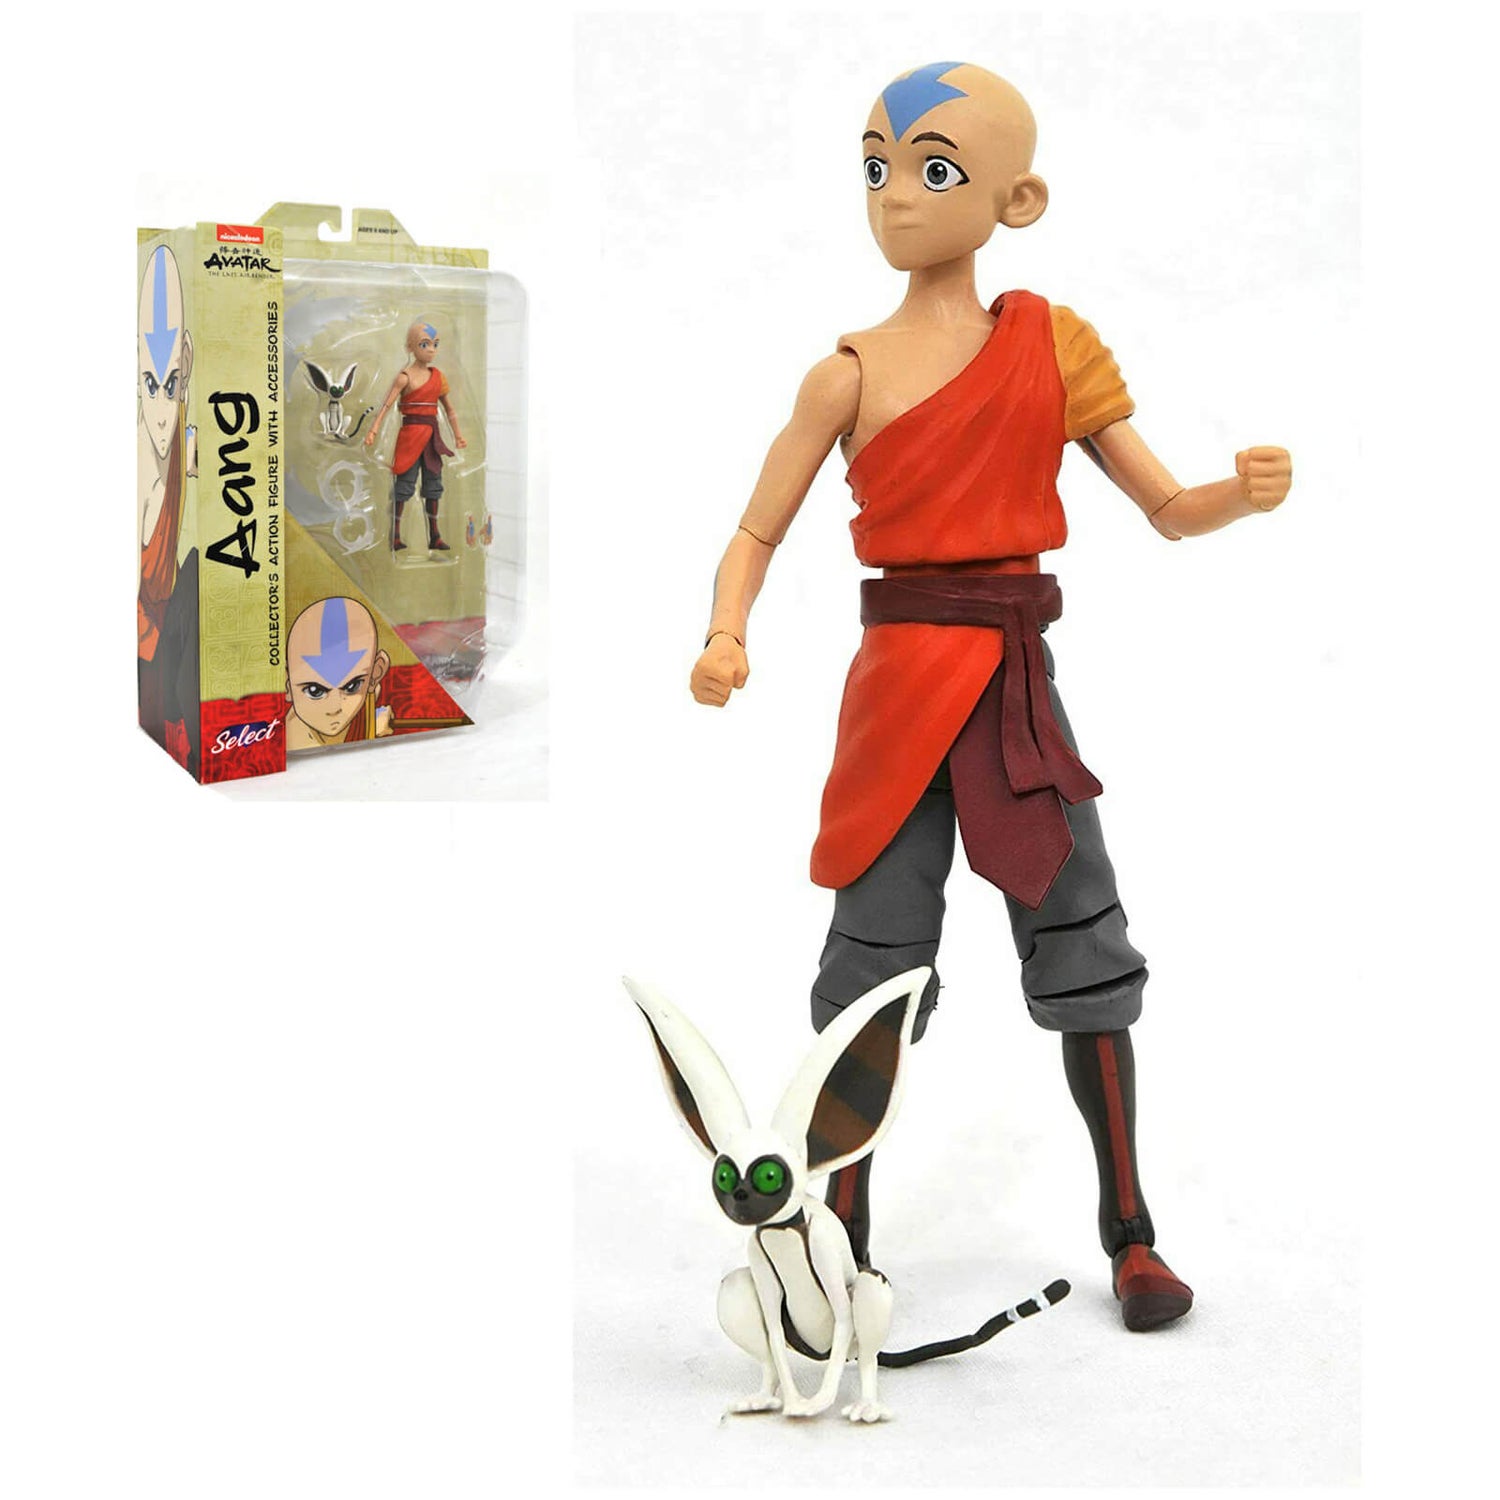 Diamond Select The Last Airbender Aang Action Figure